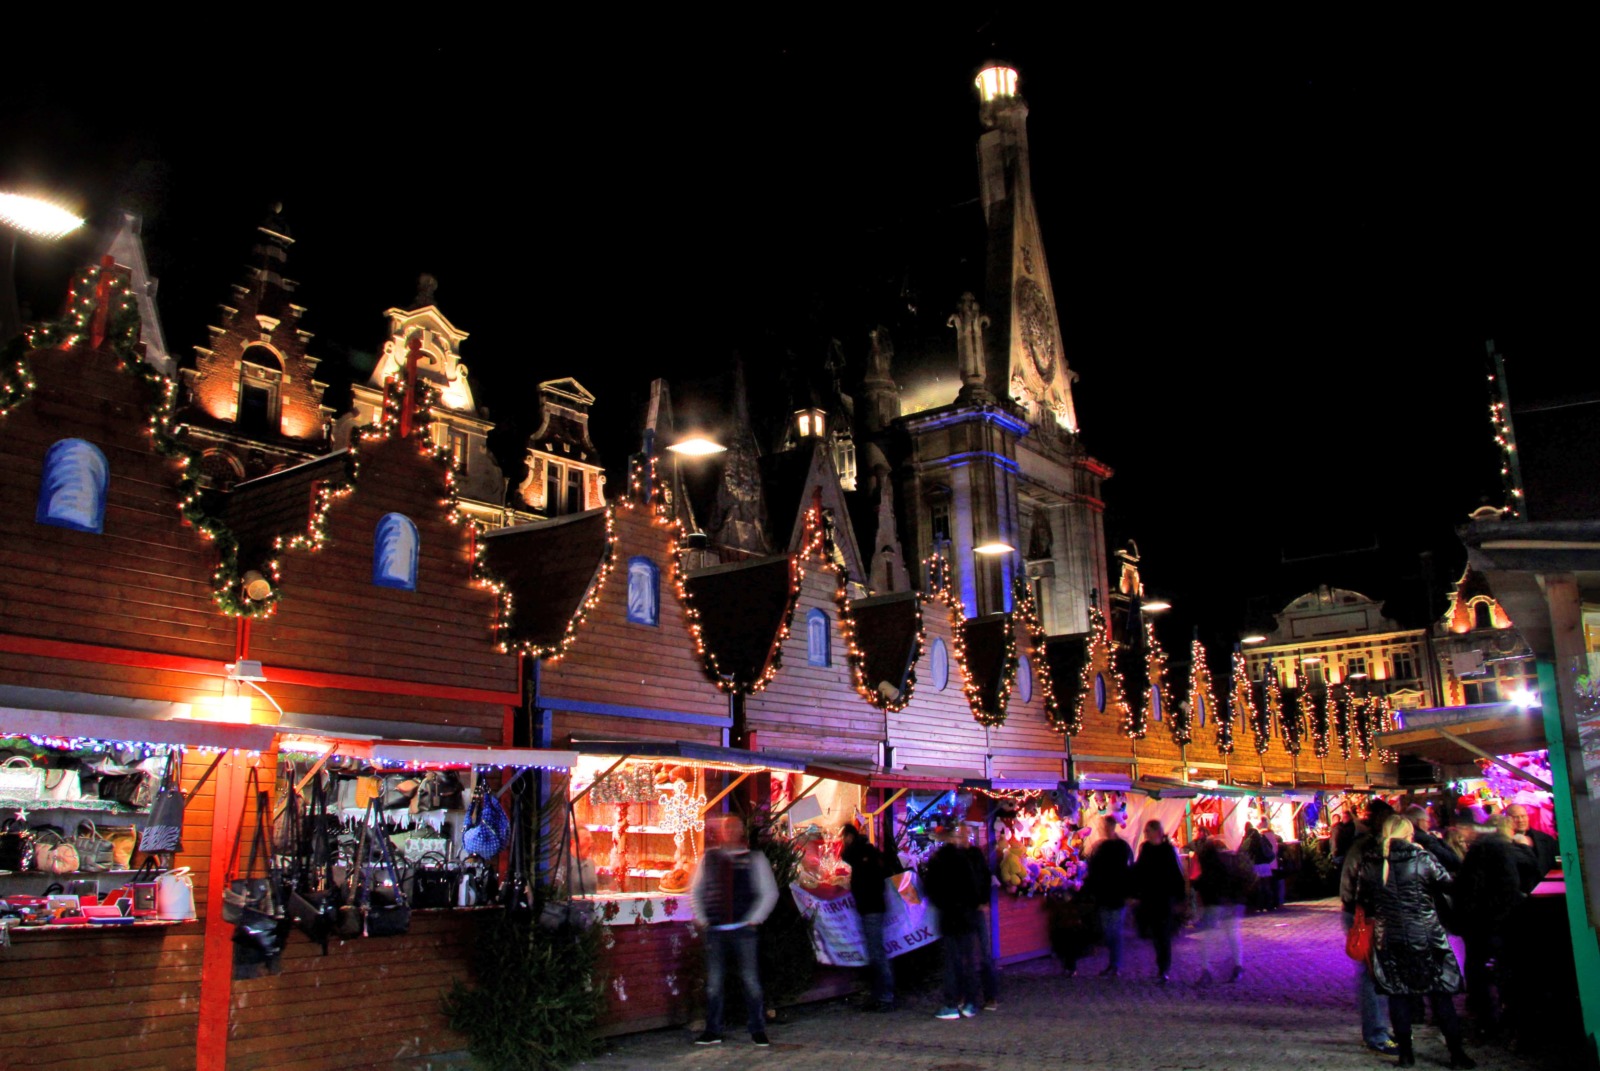 Bethune Christmas Market © Guillaume Baviere - licence [CC BY-SA 2.0] from Wikimedia Commons